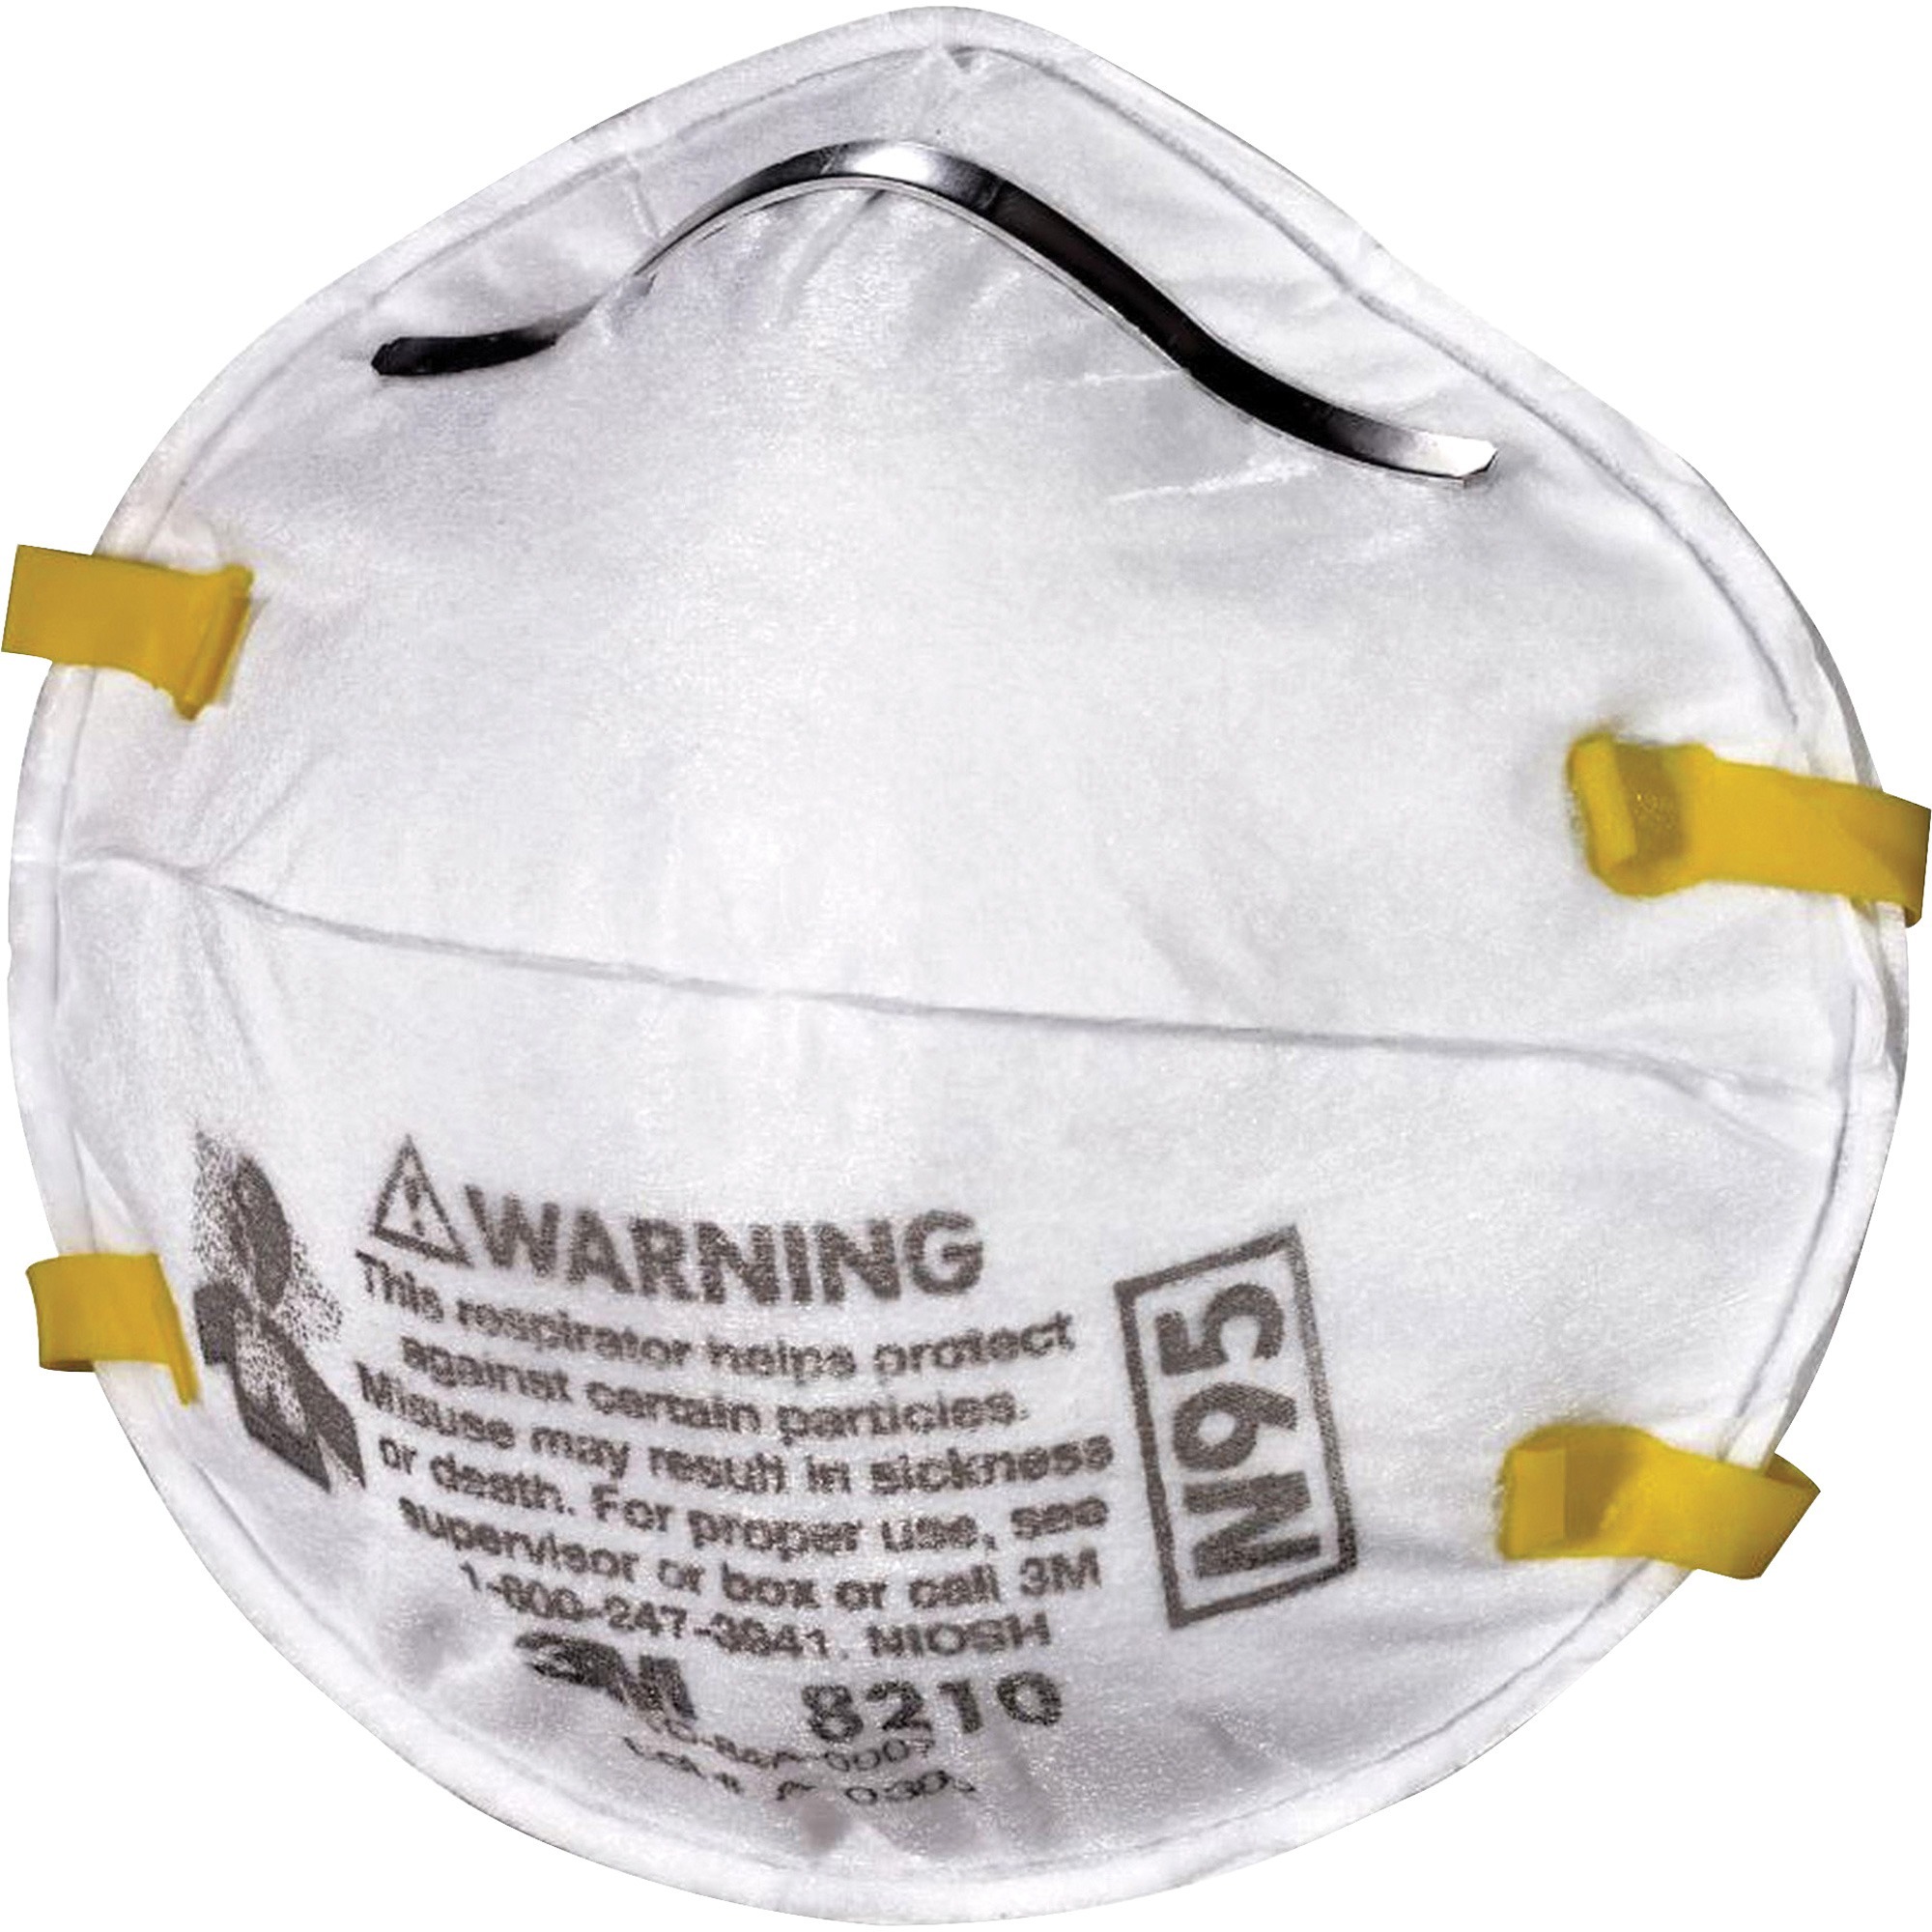 N95 Respirators Respiratory Protection Gempler S Face Masks That Help With Acne